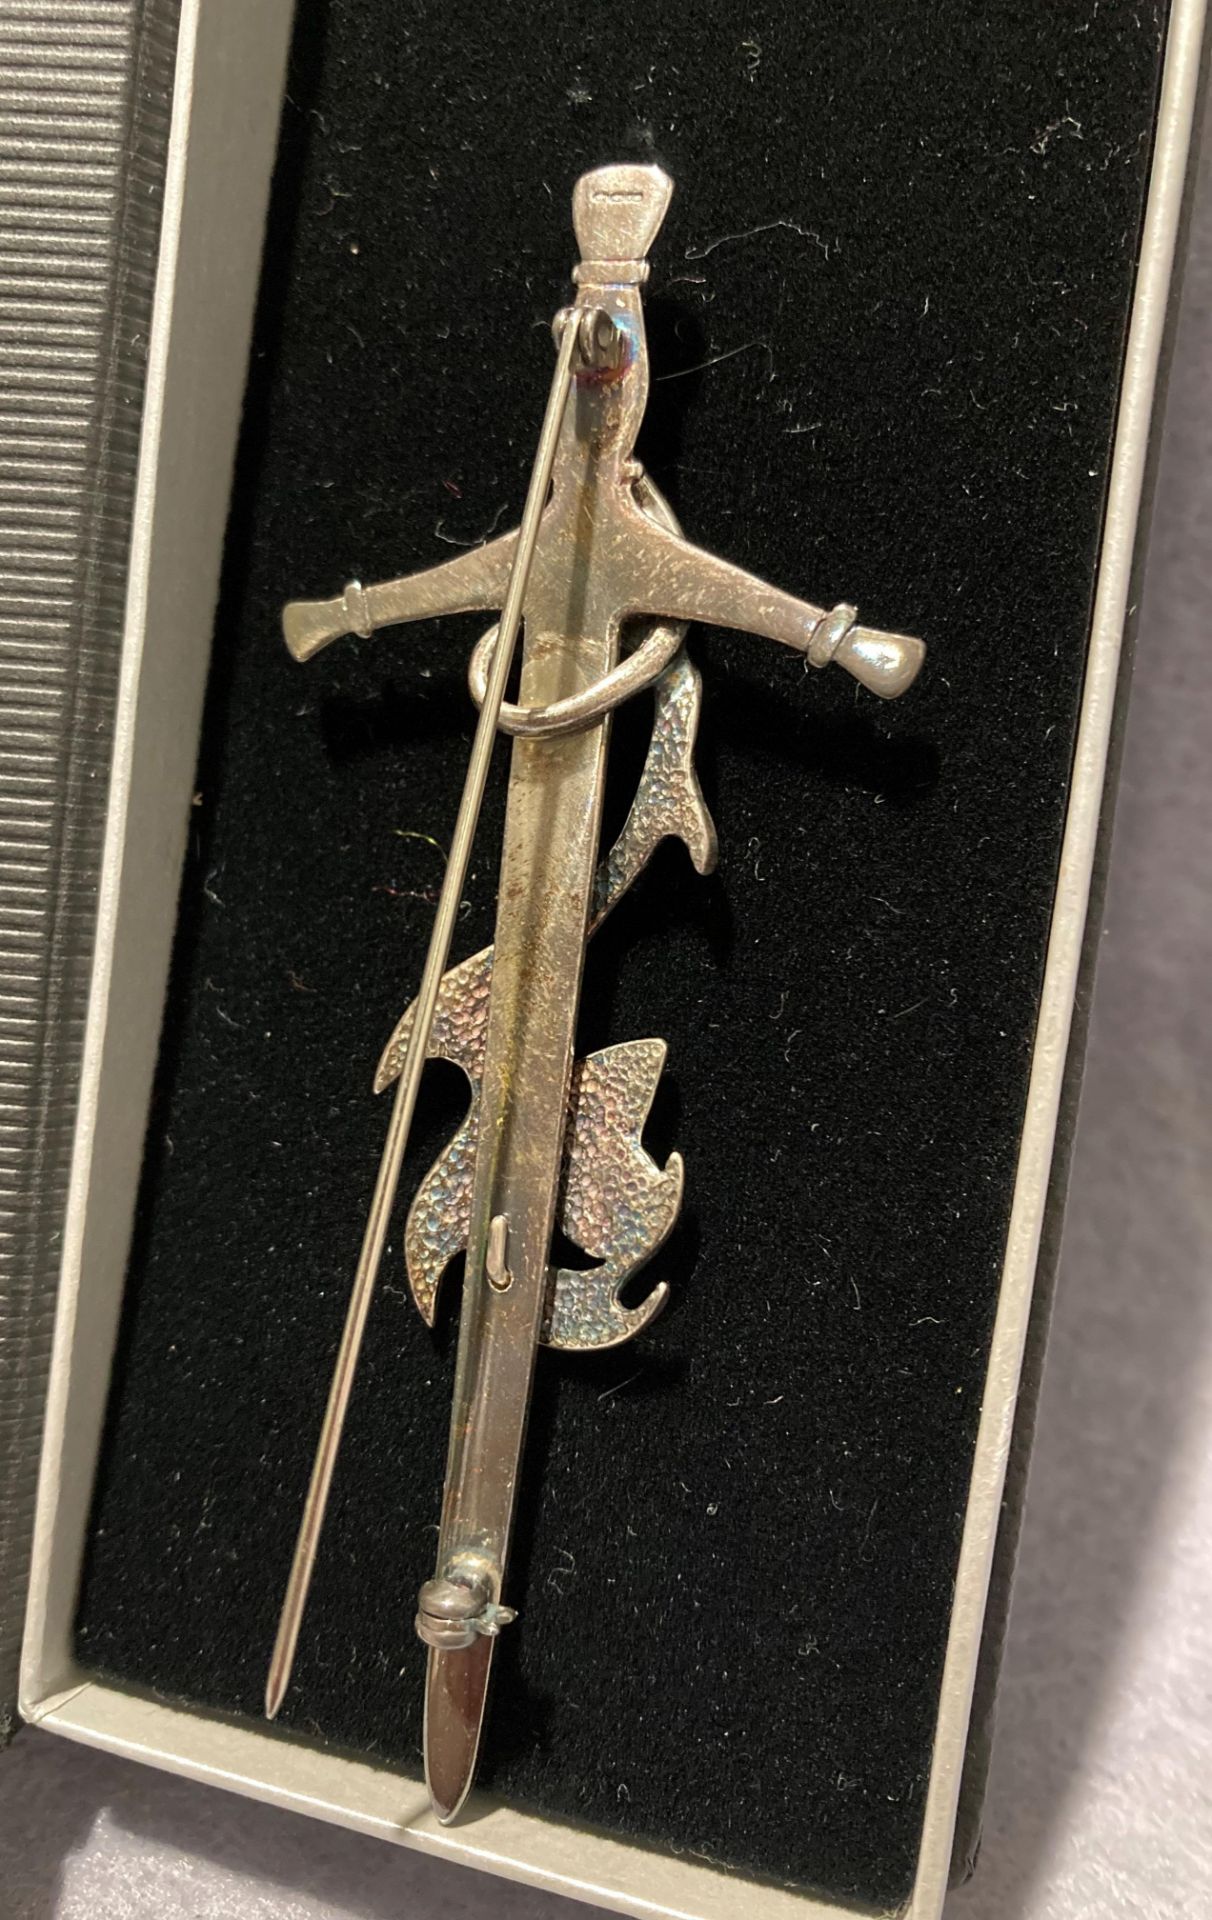 Solid silver hallmark sword with entwined thistle Scottish kilt pin (9. - Image 3 of 5